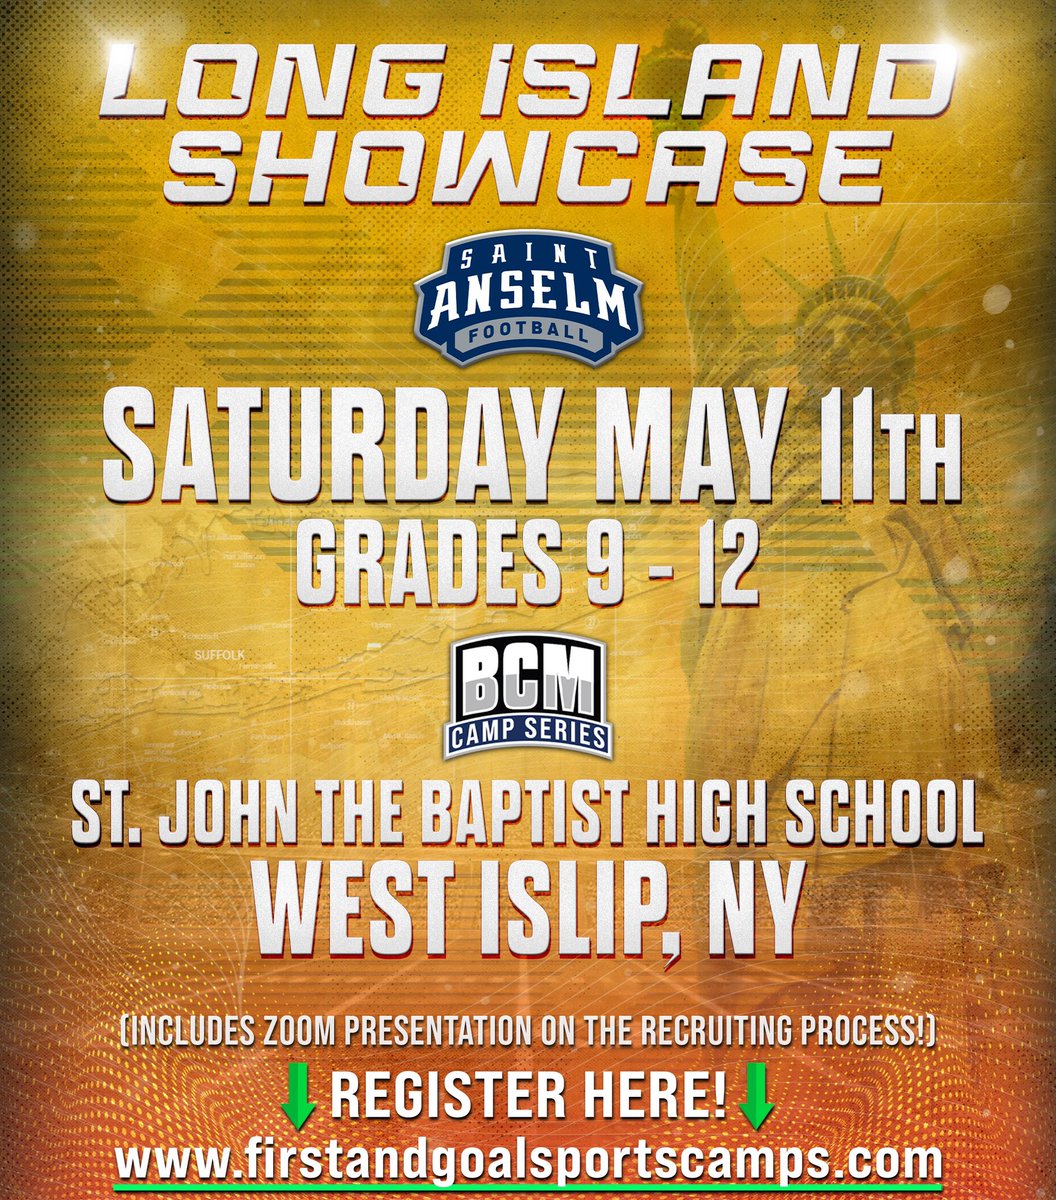 We have been going through the registration list for the Long Island Showcase and evaluating the tape. The competition will be incredible! We are excited to coach, evaluate, and have fun on Long Island! #BCM firstandgoalsportscamps.com